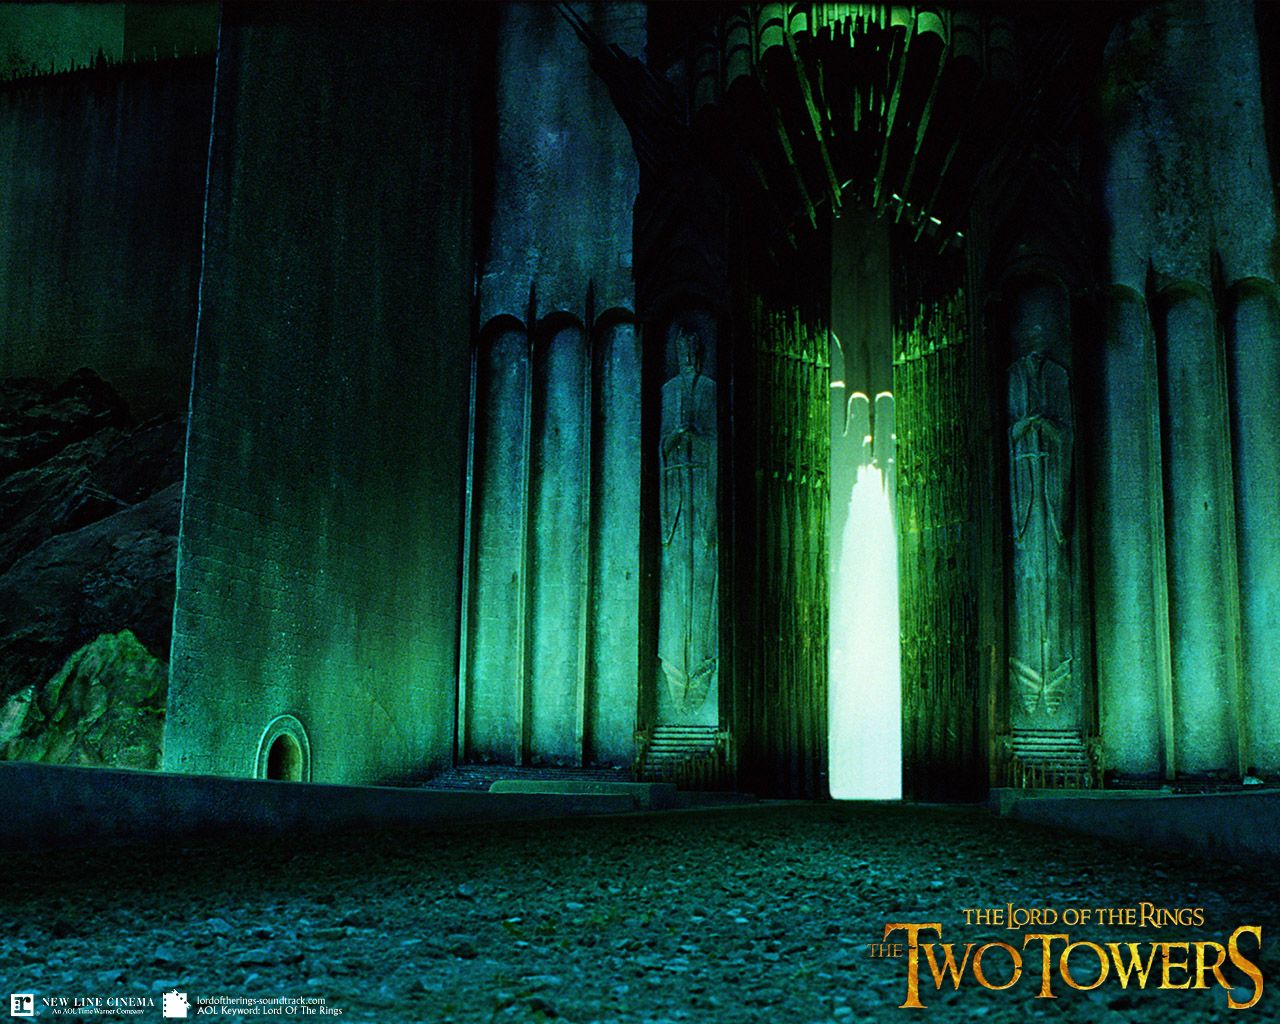 The Lord Of The Rings: The Two Towers Wallpapers